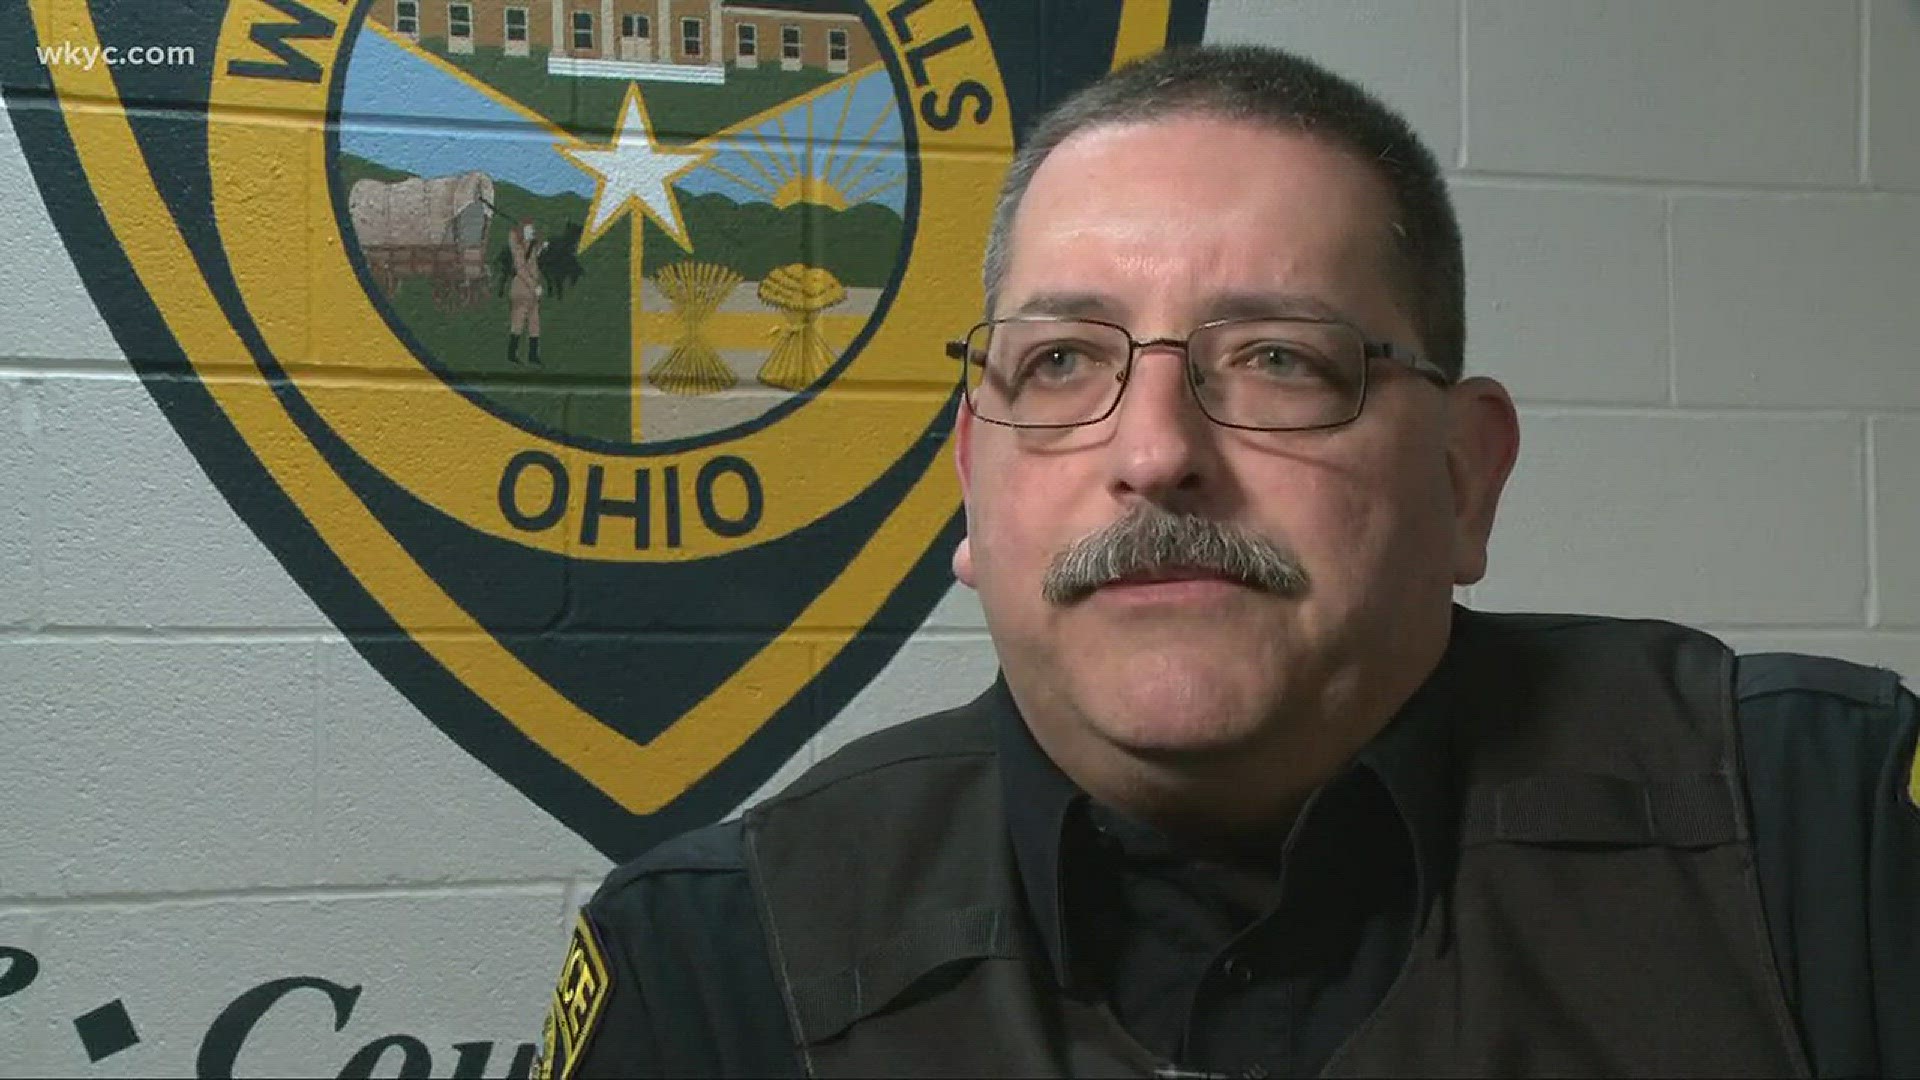 Officer returns to work after Willoughby car dealership shooting